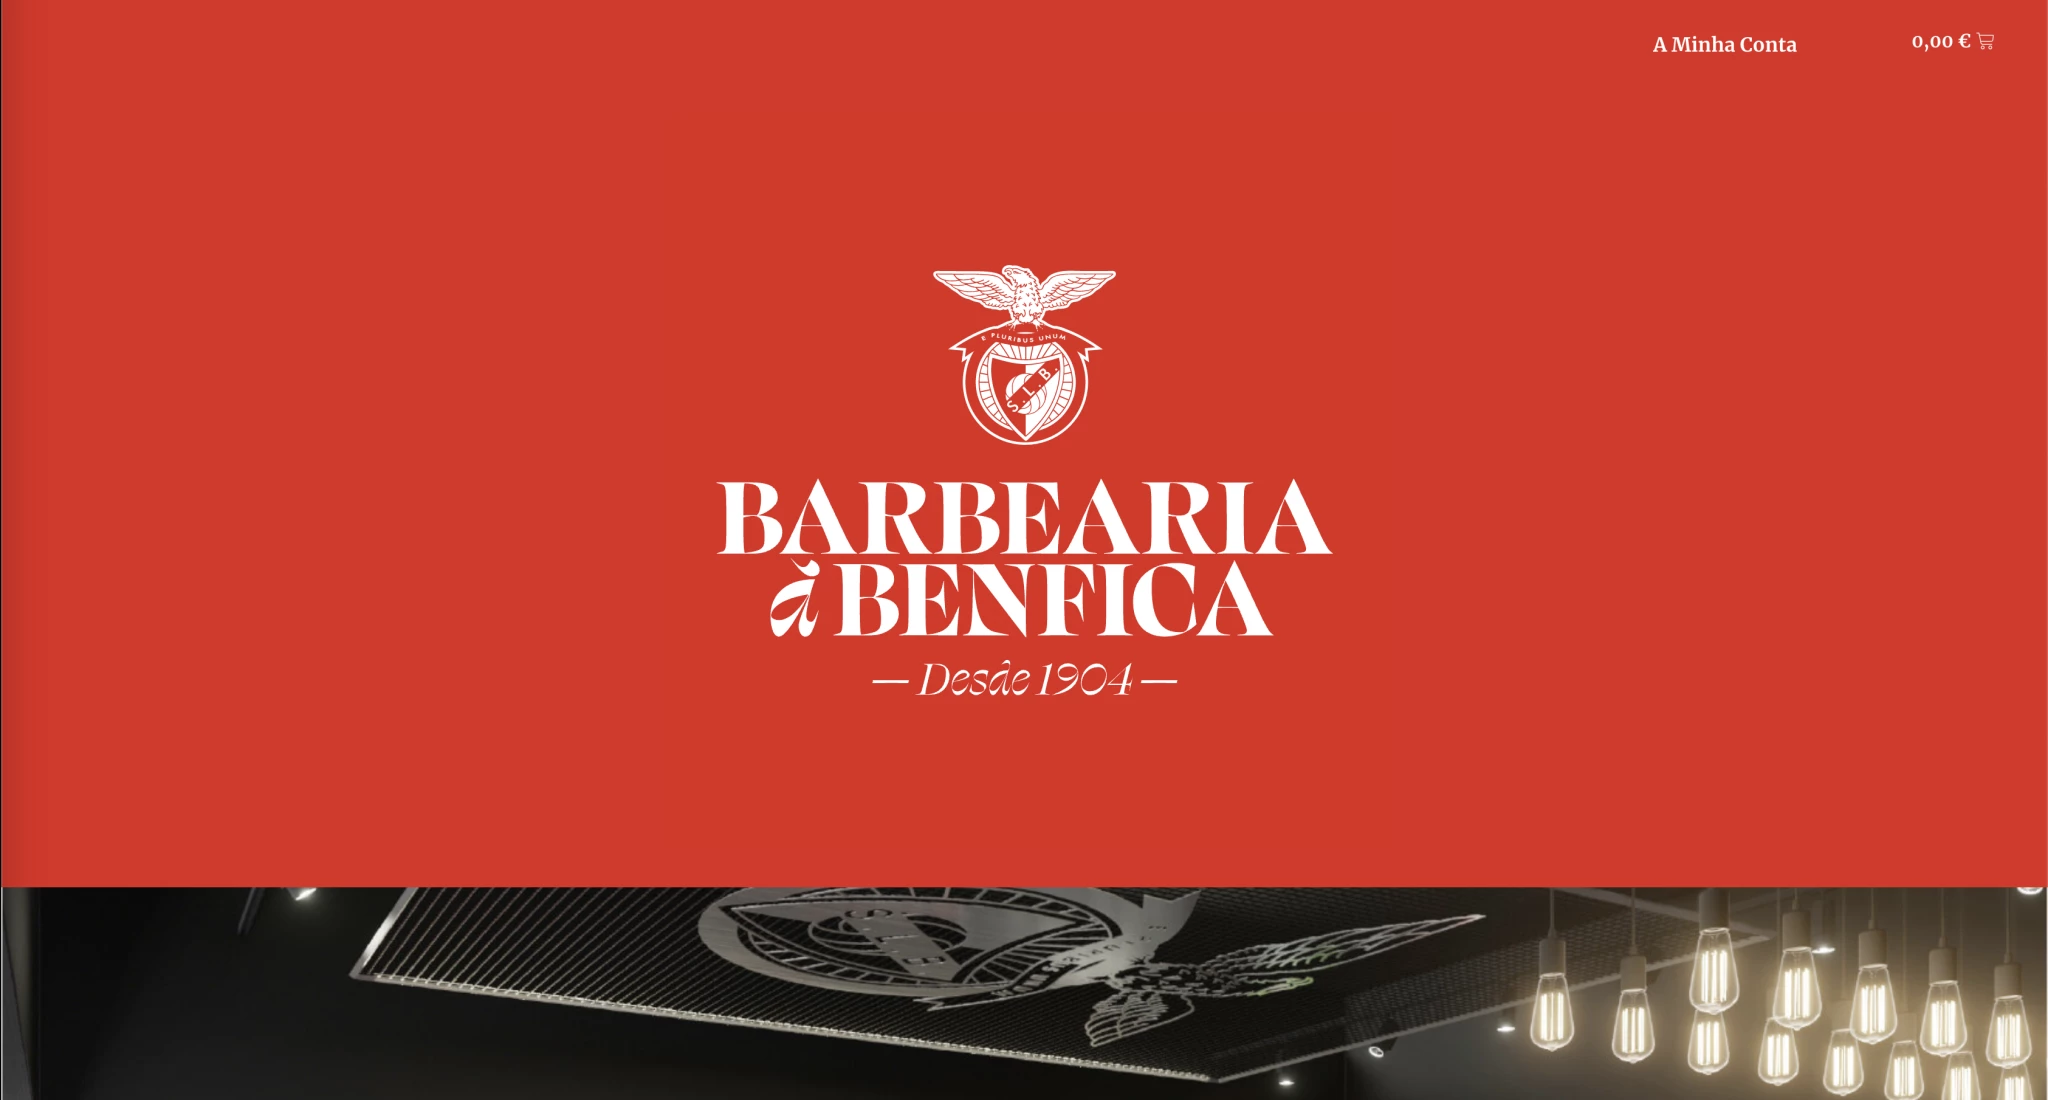 Sport Lisboa e Benfica now has a barbershop and beauty products